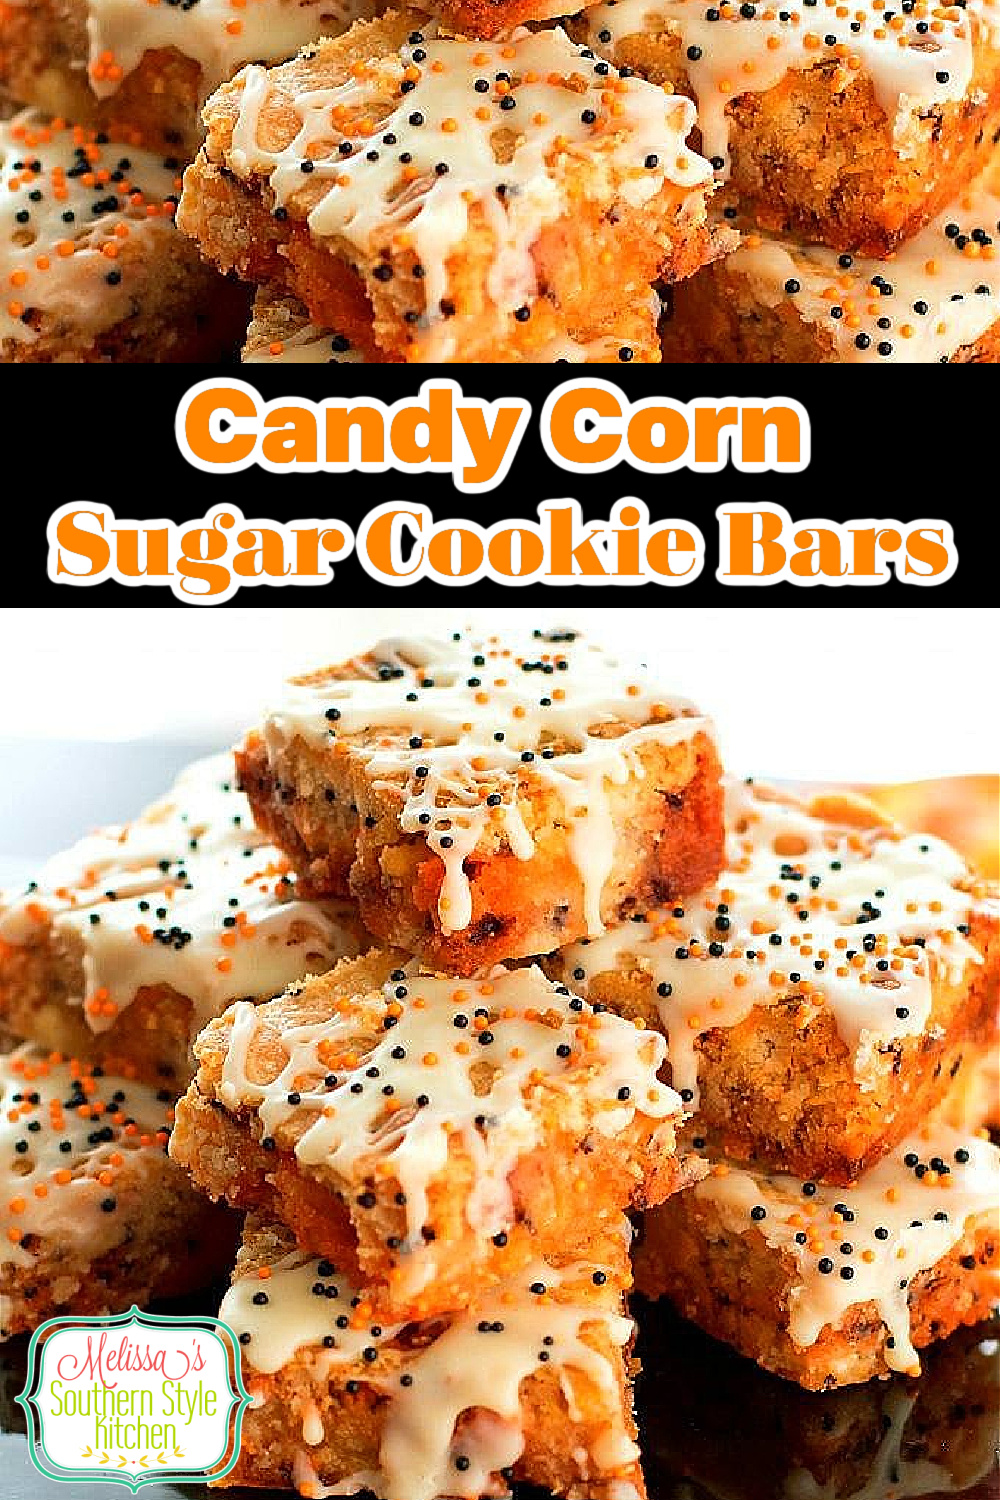 Kids of all ages love these rich and chewy Candy Corn Sugar Cookie Bars #sugarcookiebars #candycorncookies #candycornsugarcookiebars #candycorn #dessets #fallbaking #falldesserts #cookies #thanksgivingdessets #southernfood #dessertfoodrecipes #southerndesserts via @melissasssk